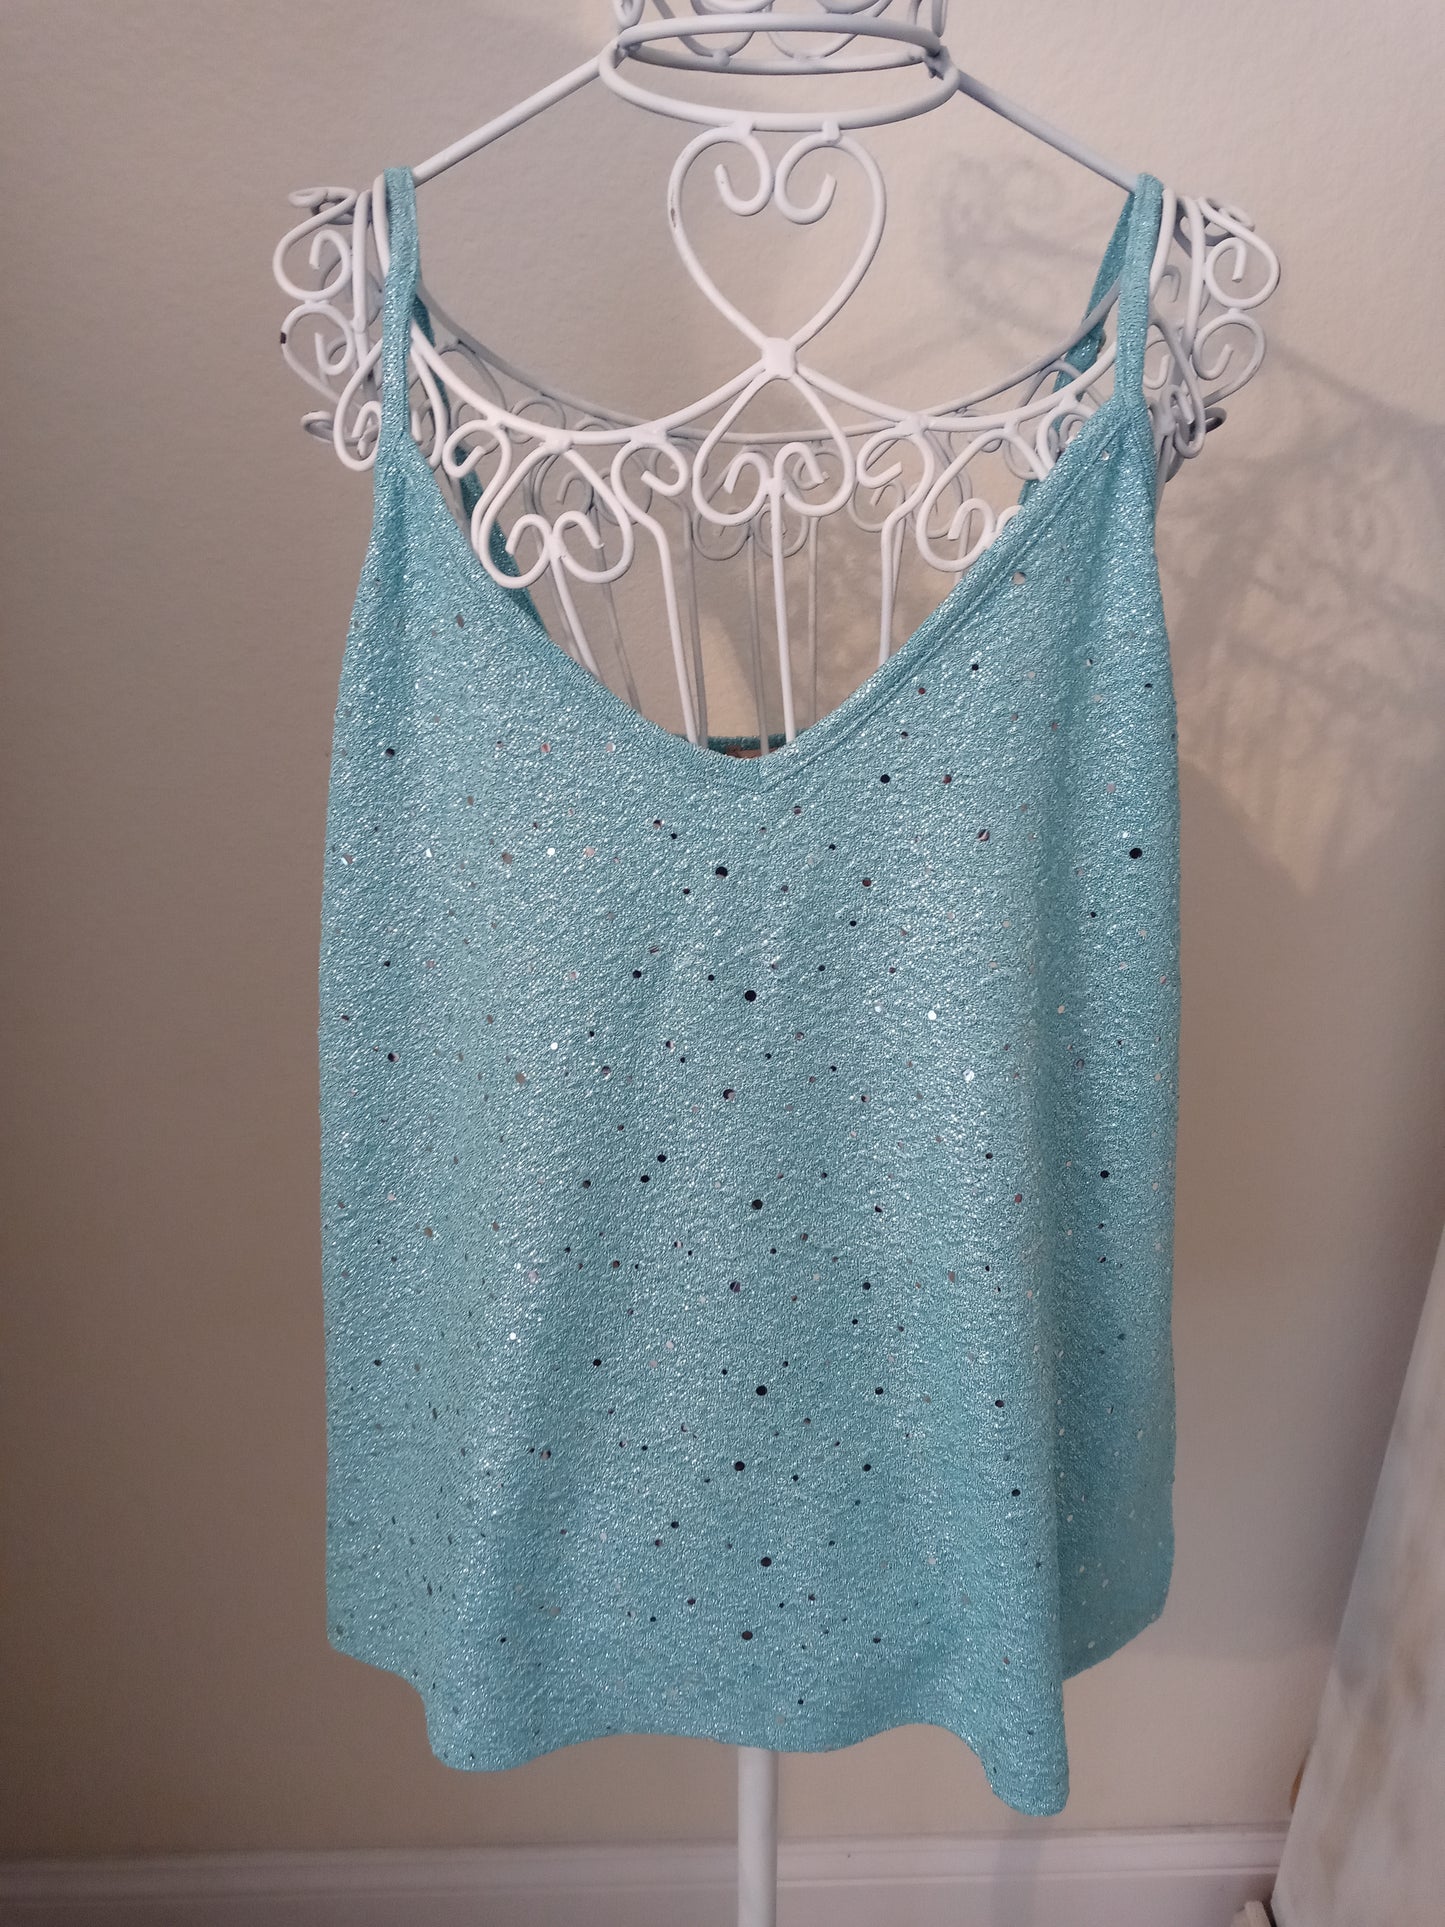 Lavish Teal / Turquoise All Over Top Women's Size Small